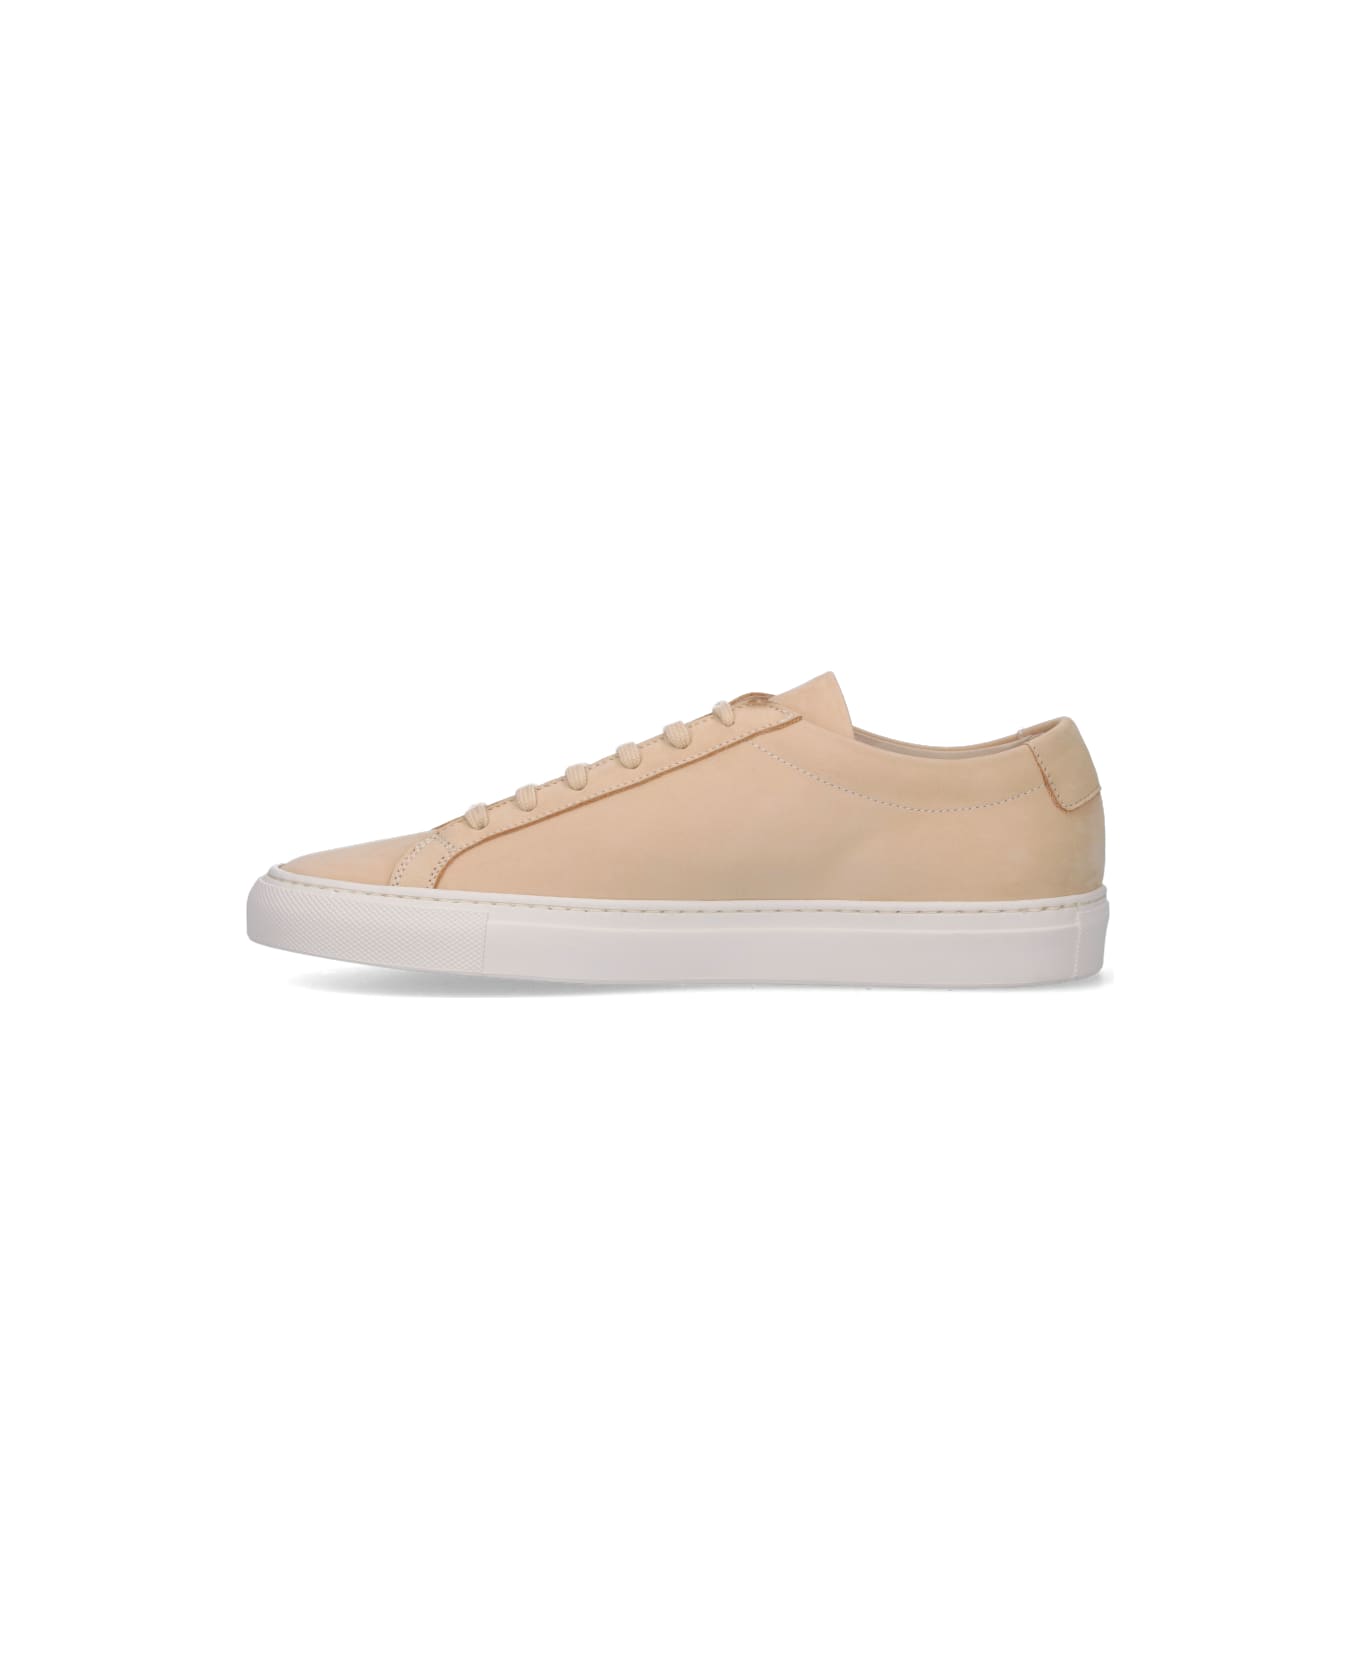 Common Projects Logo Low Sneakers - Beige スニーカー